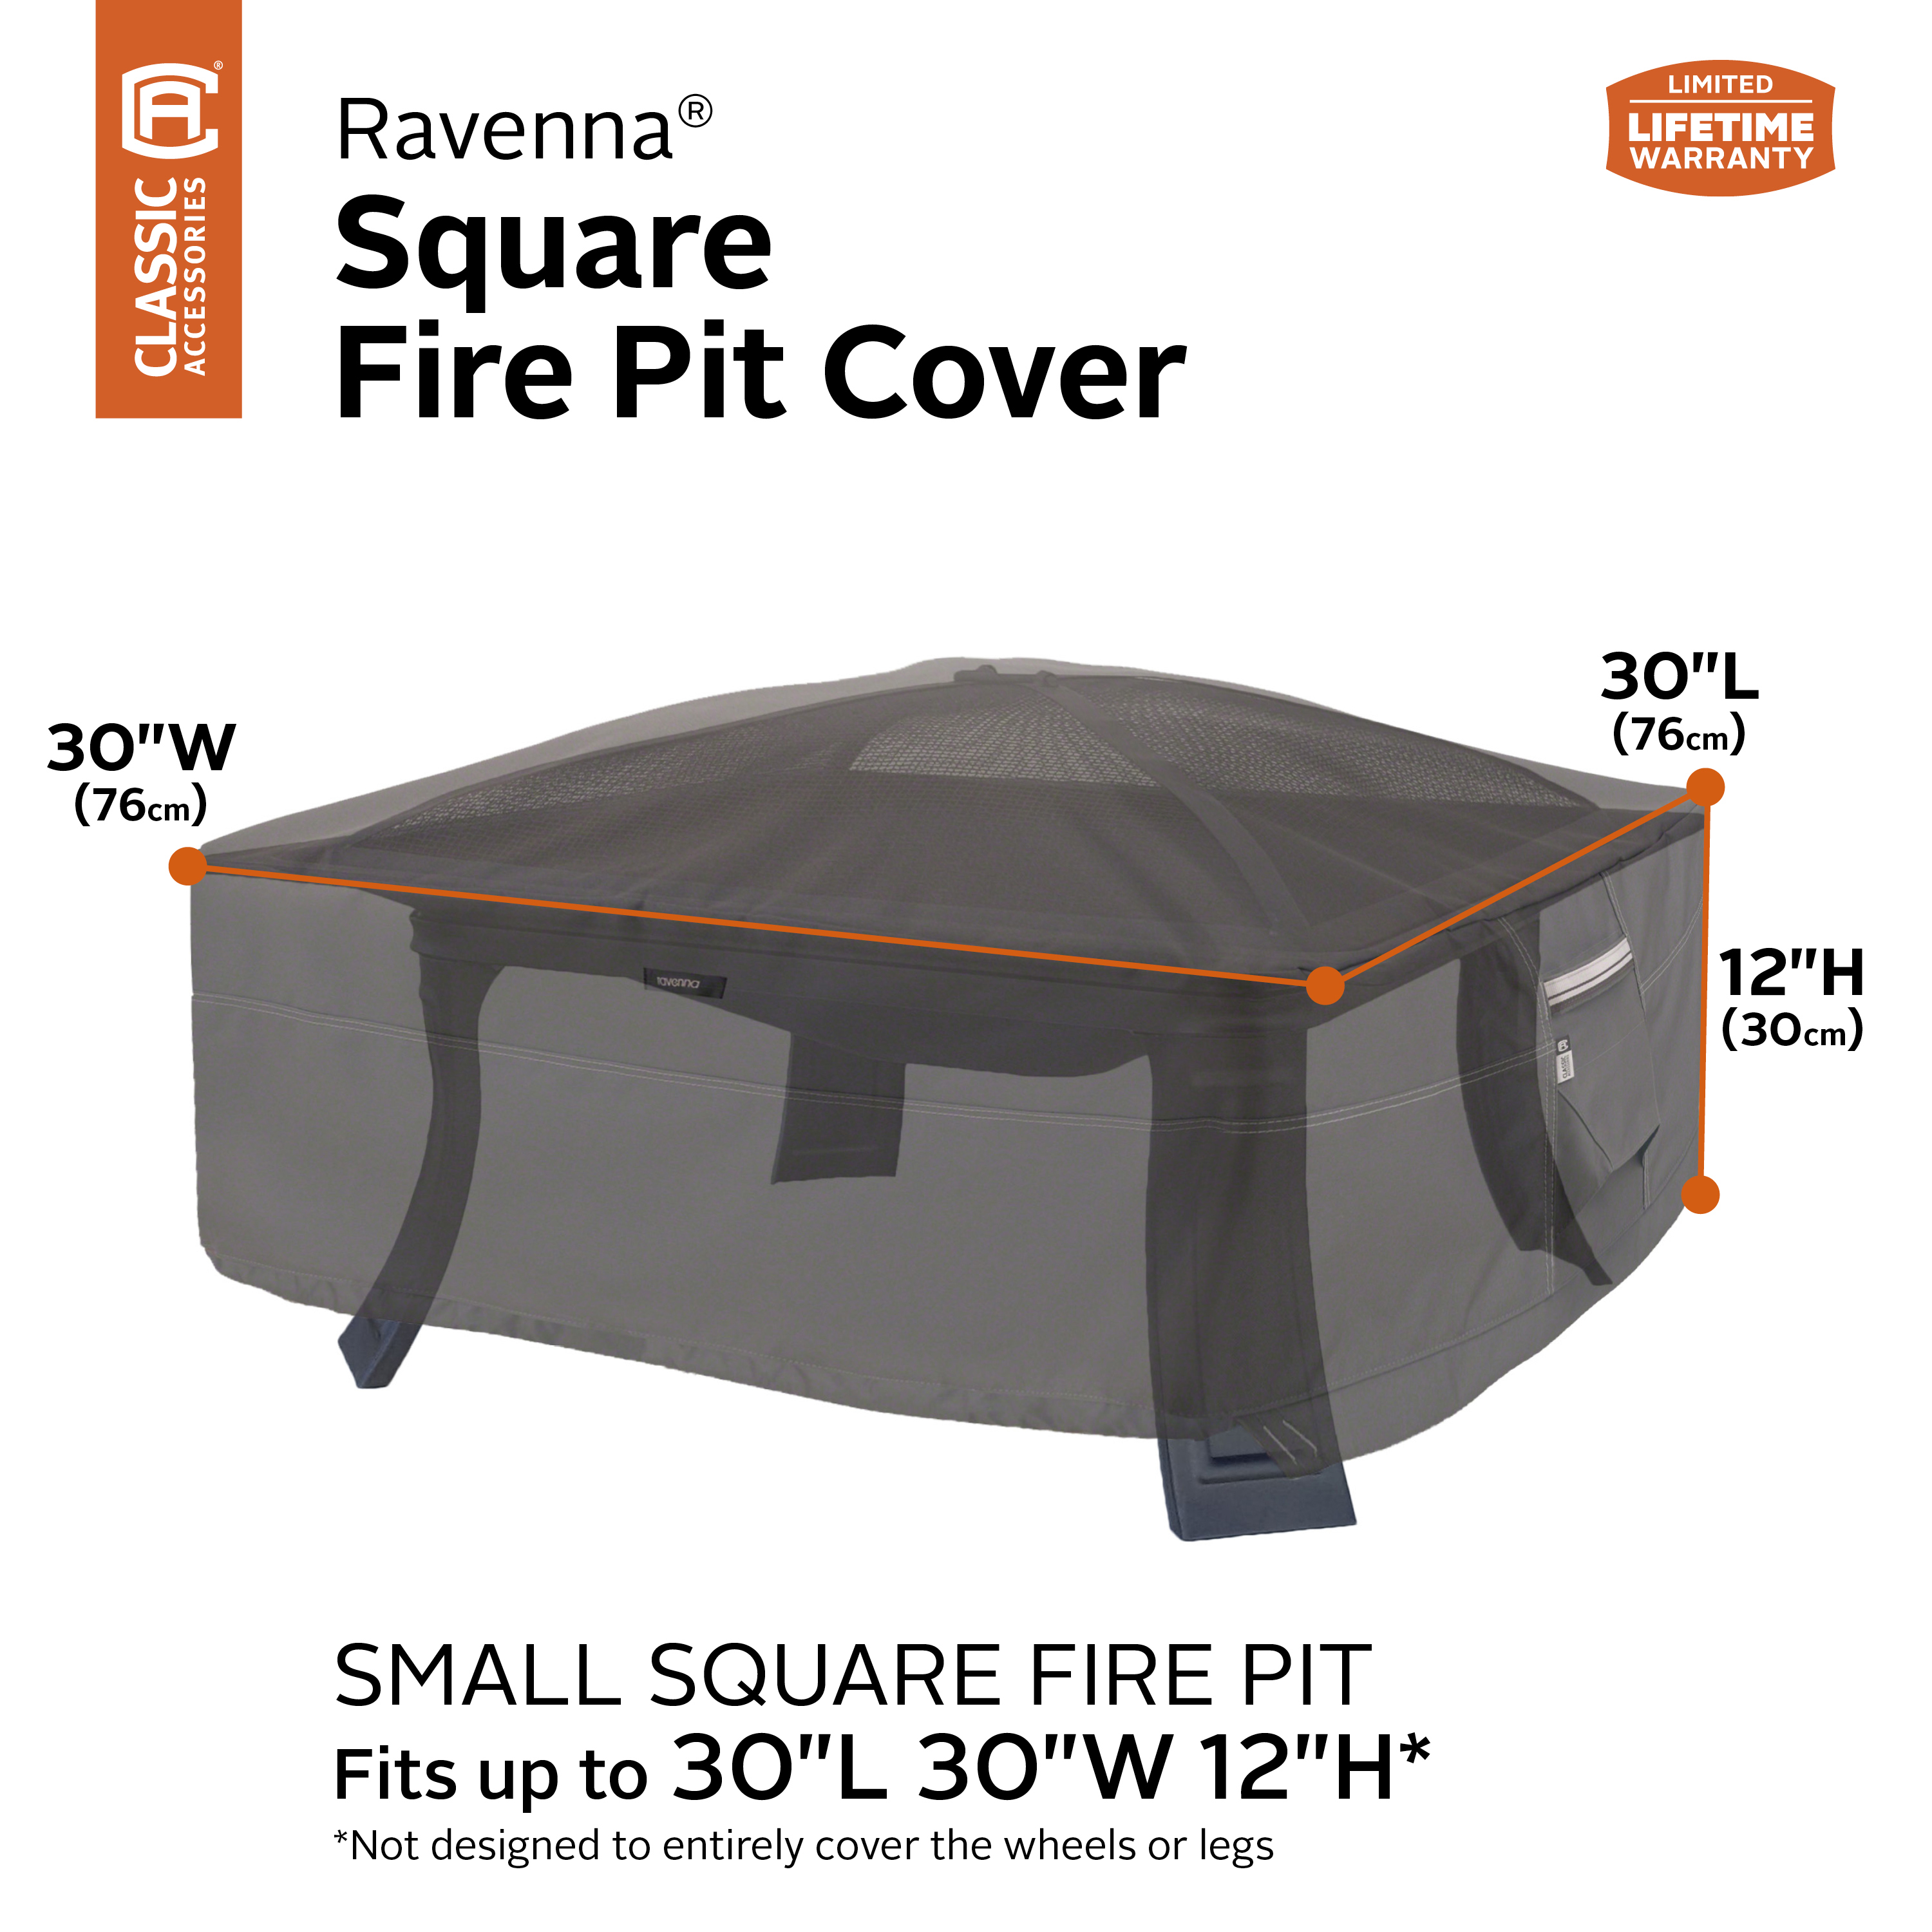 Classic Accessories Ravenna Full Coverage Fire Pit Patio Storage Cover - image 4 of 18